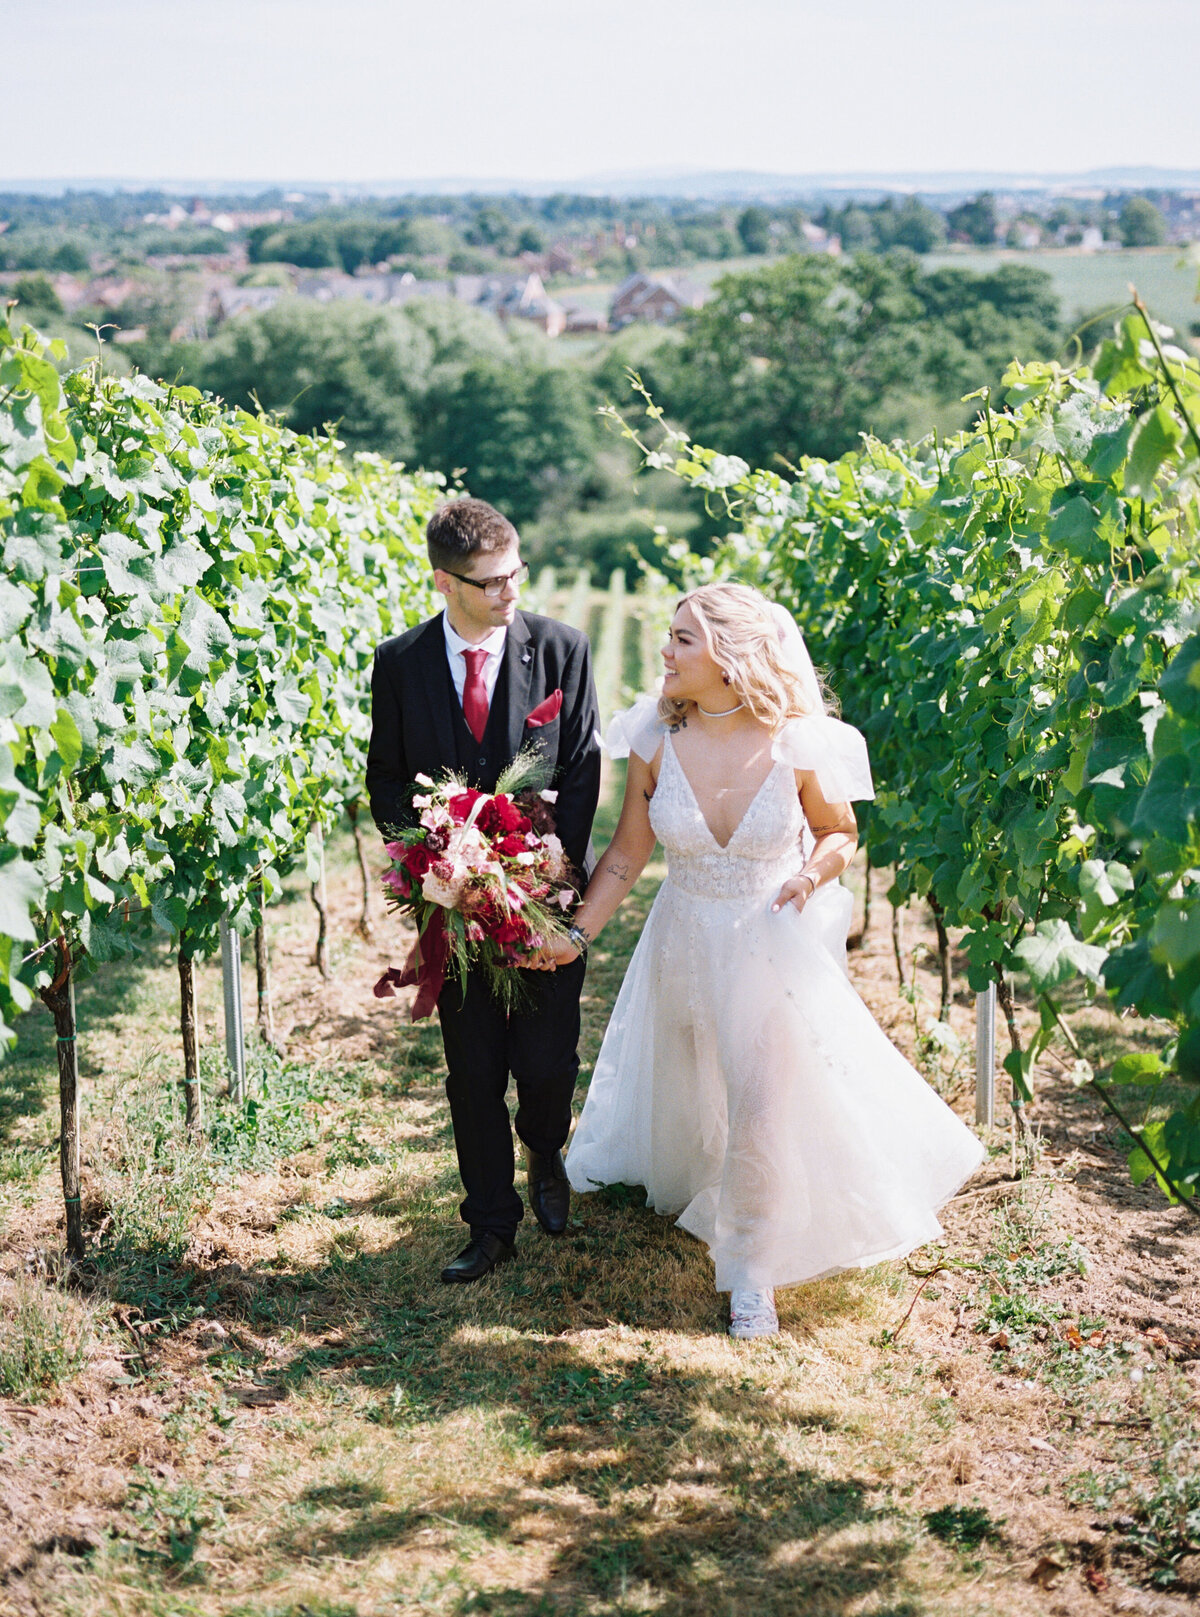 groom holding brides bold red flower bouquet while walking hands to hands in the vineyard fields